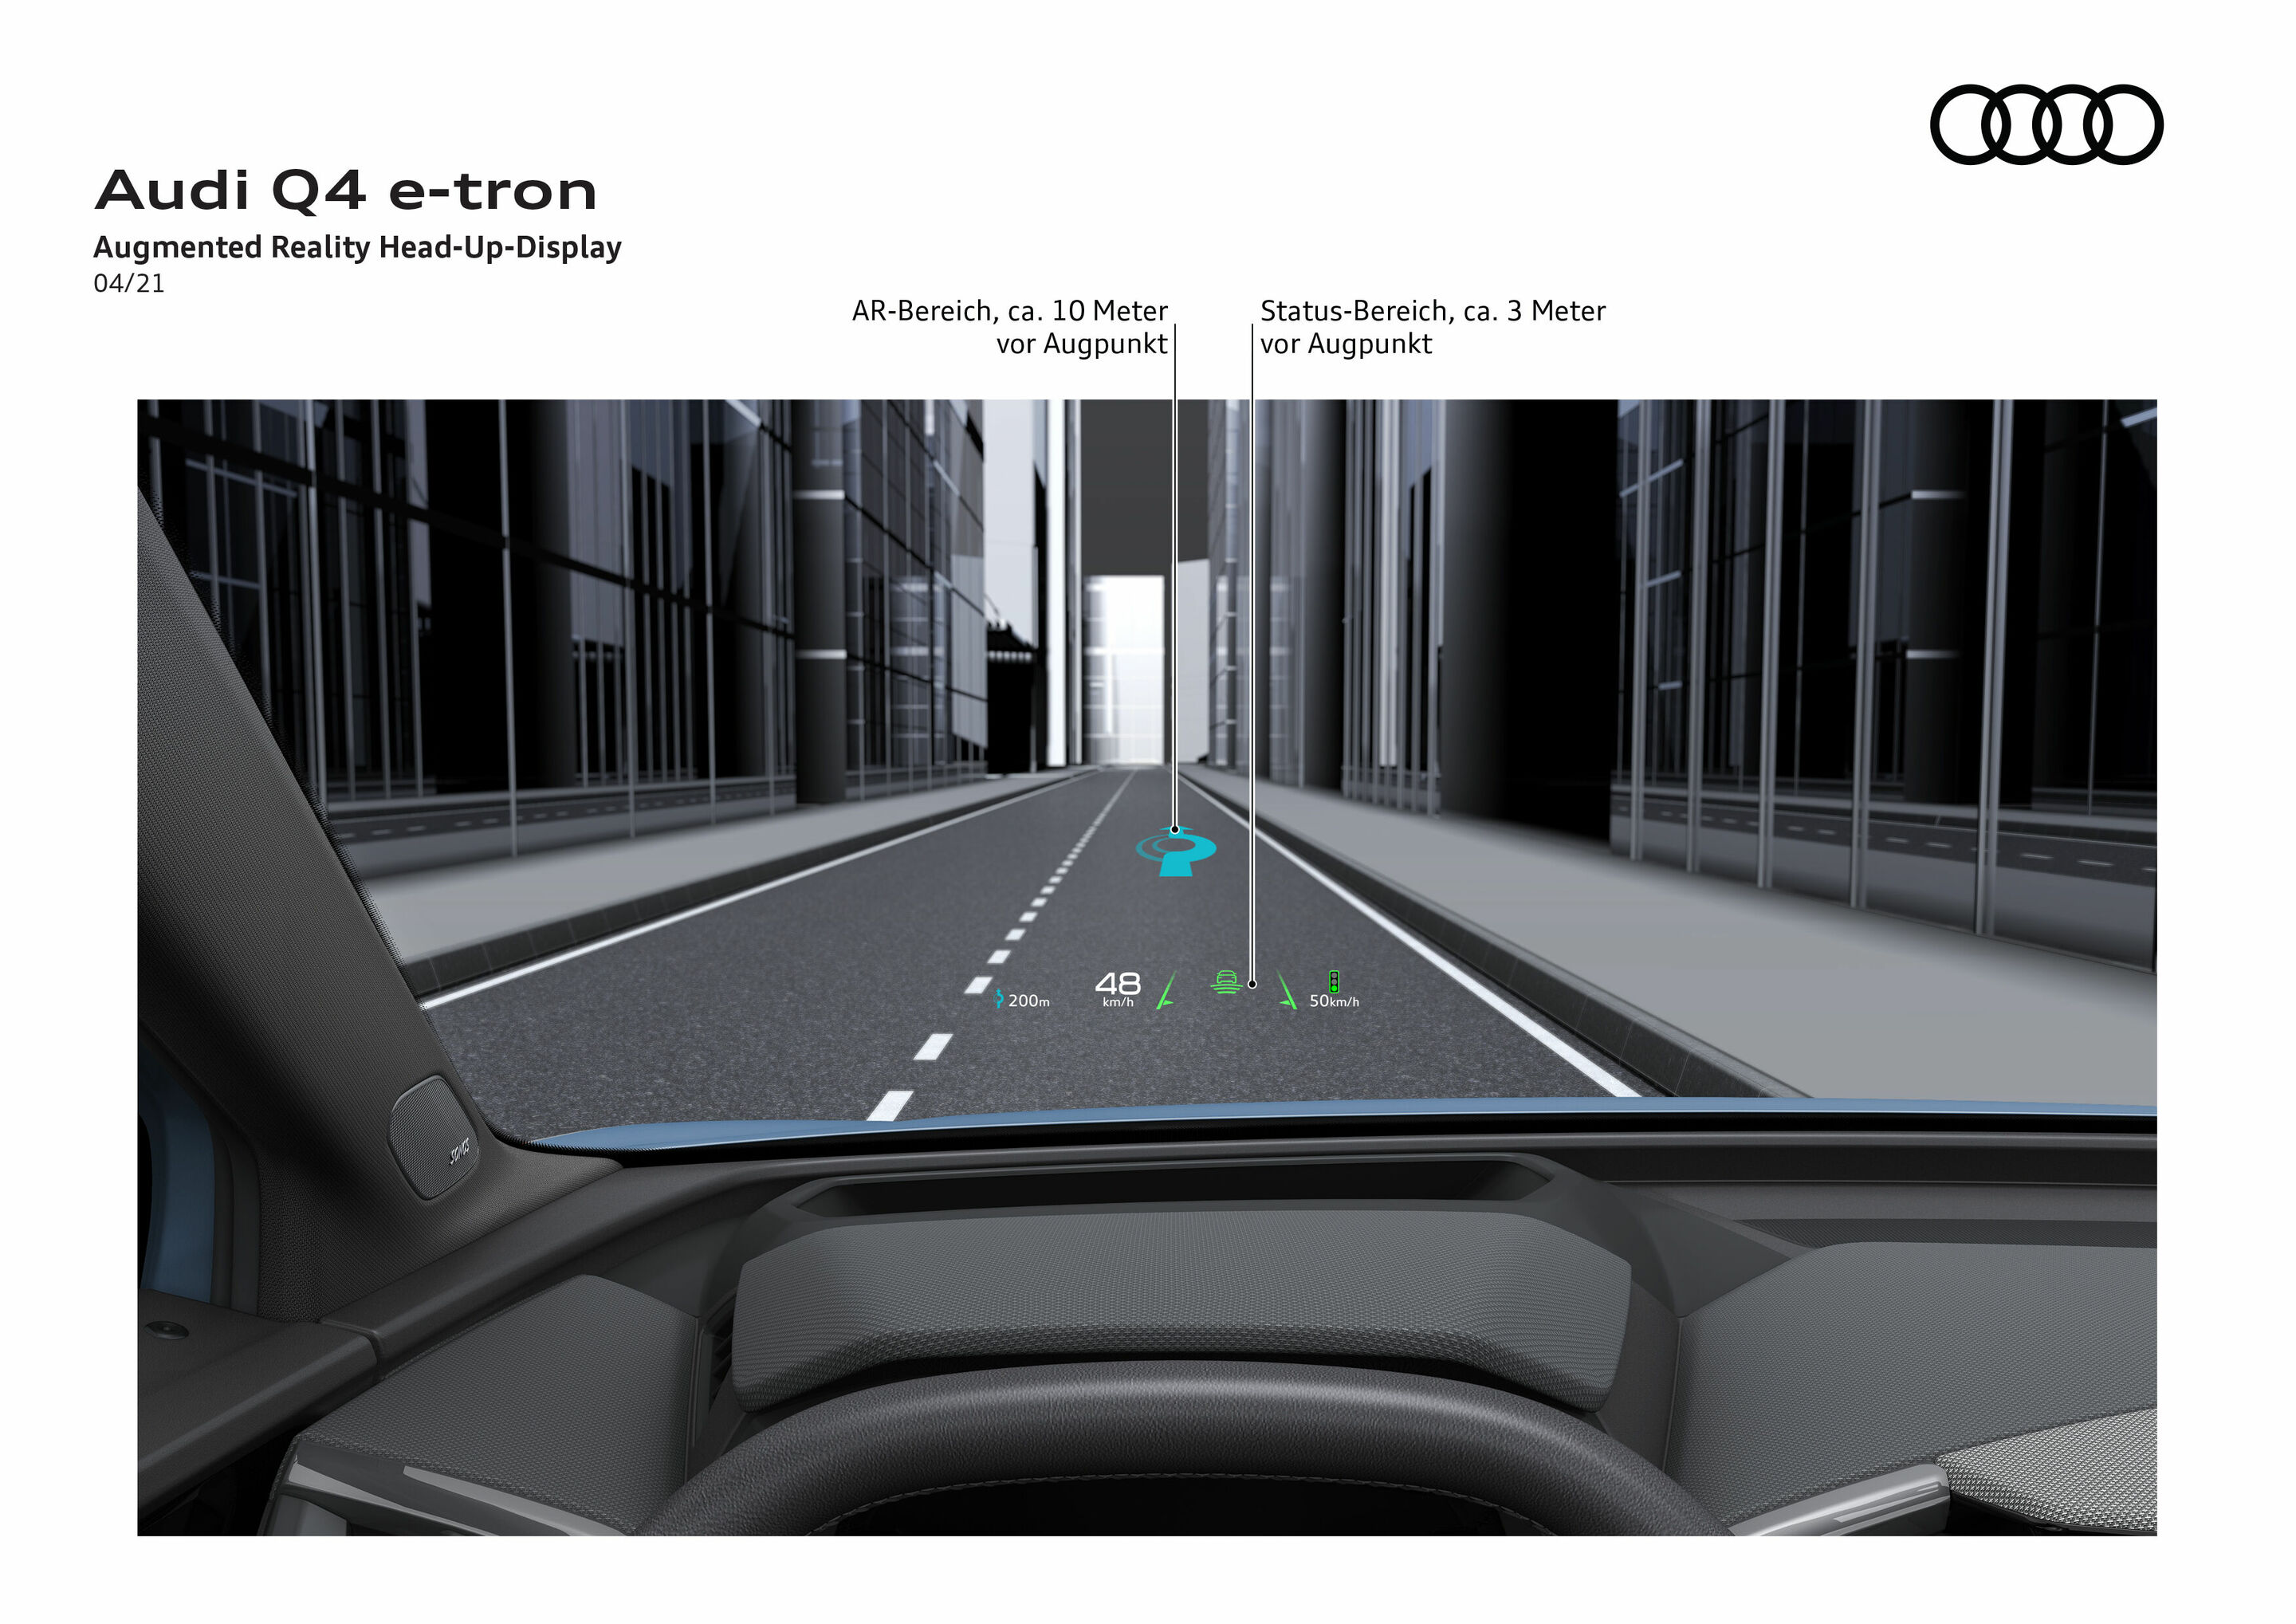 Augmented Reality Head-up-Display